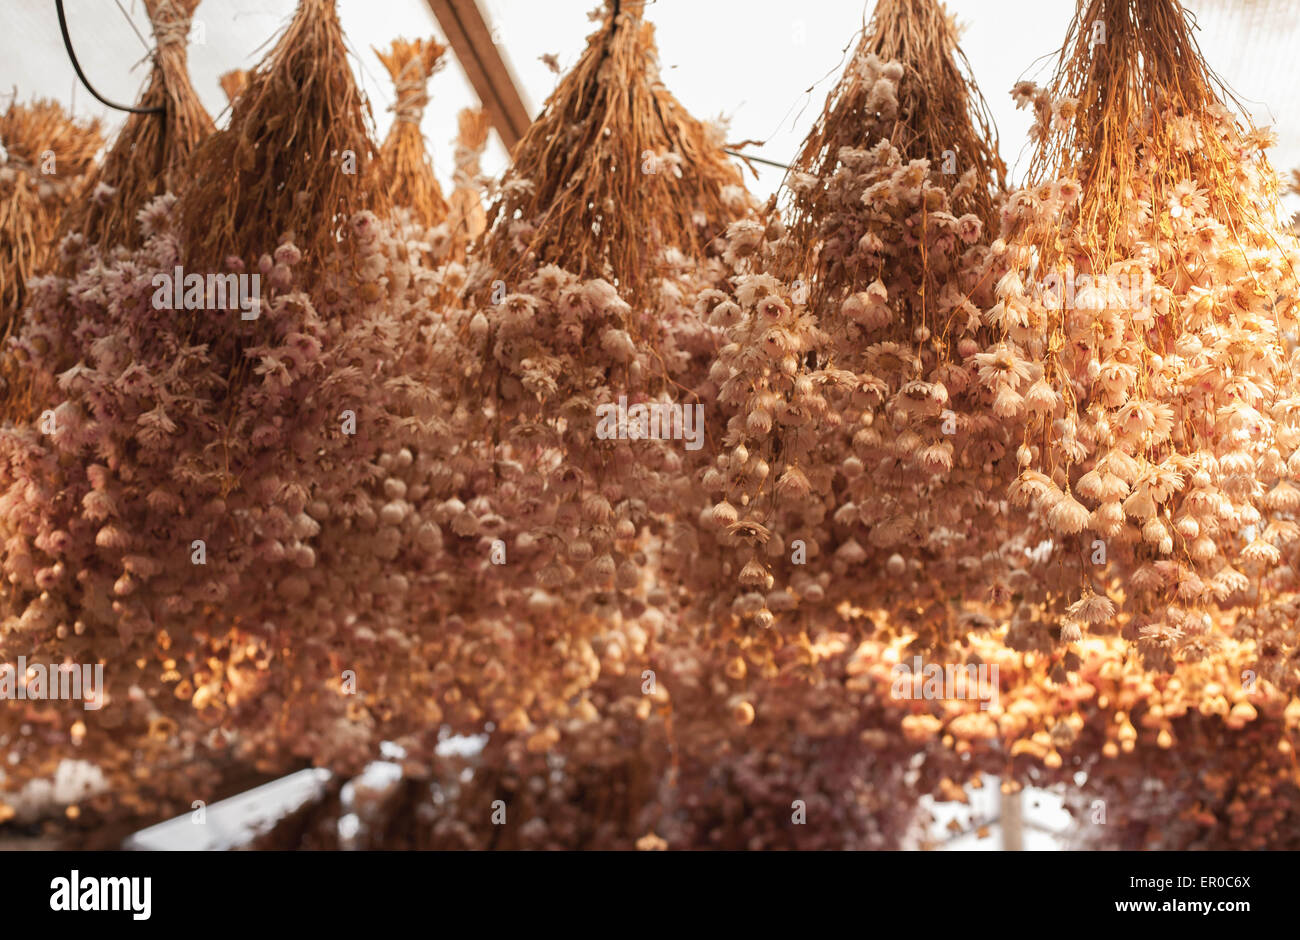 Dried flowers hanging in an Amsterdam market Stock Photo